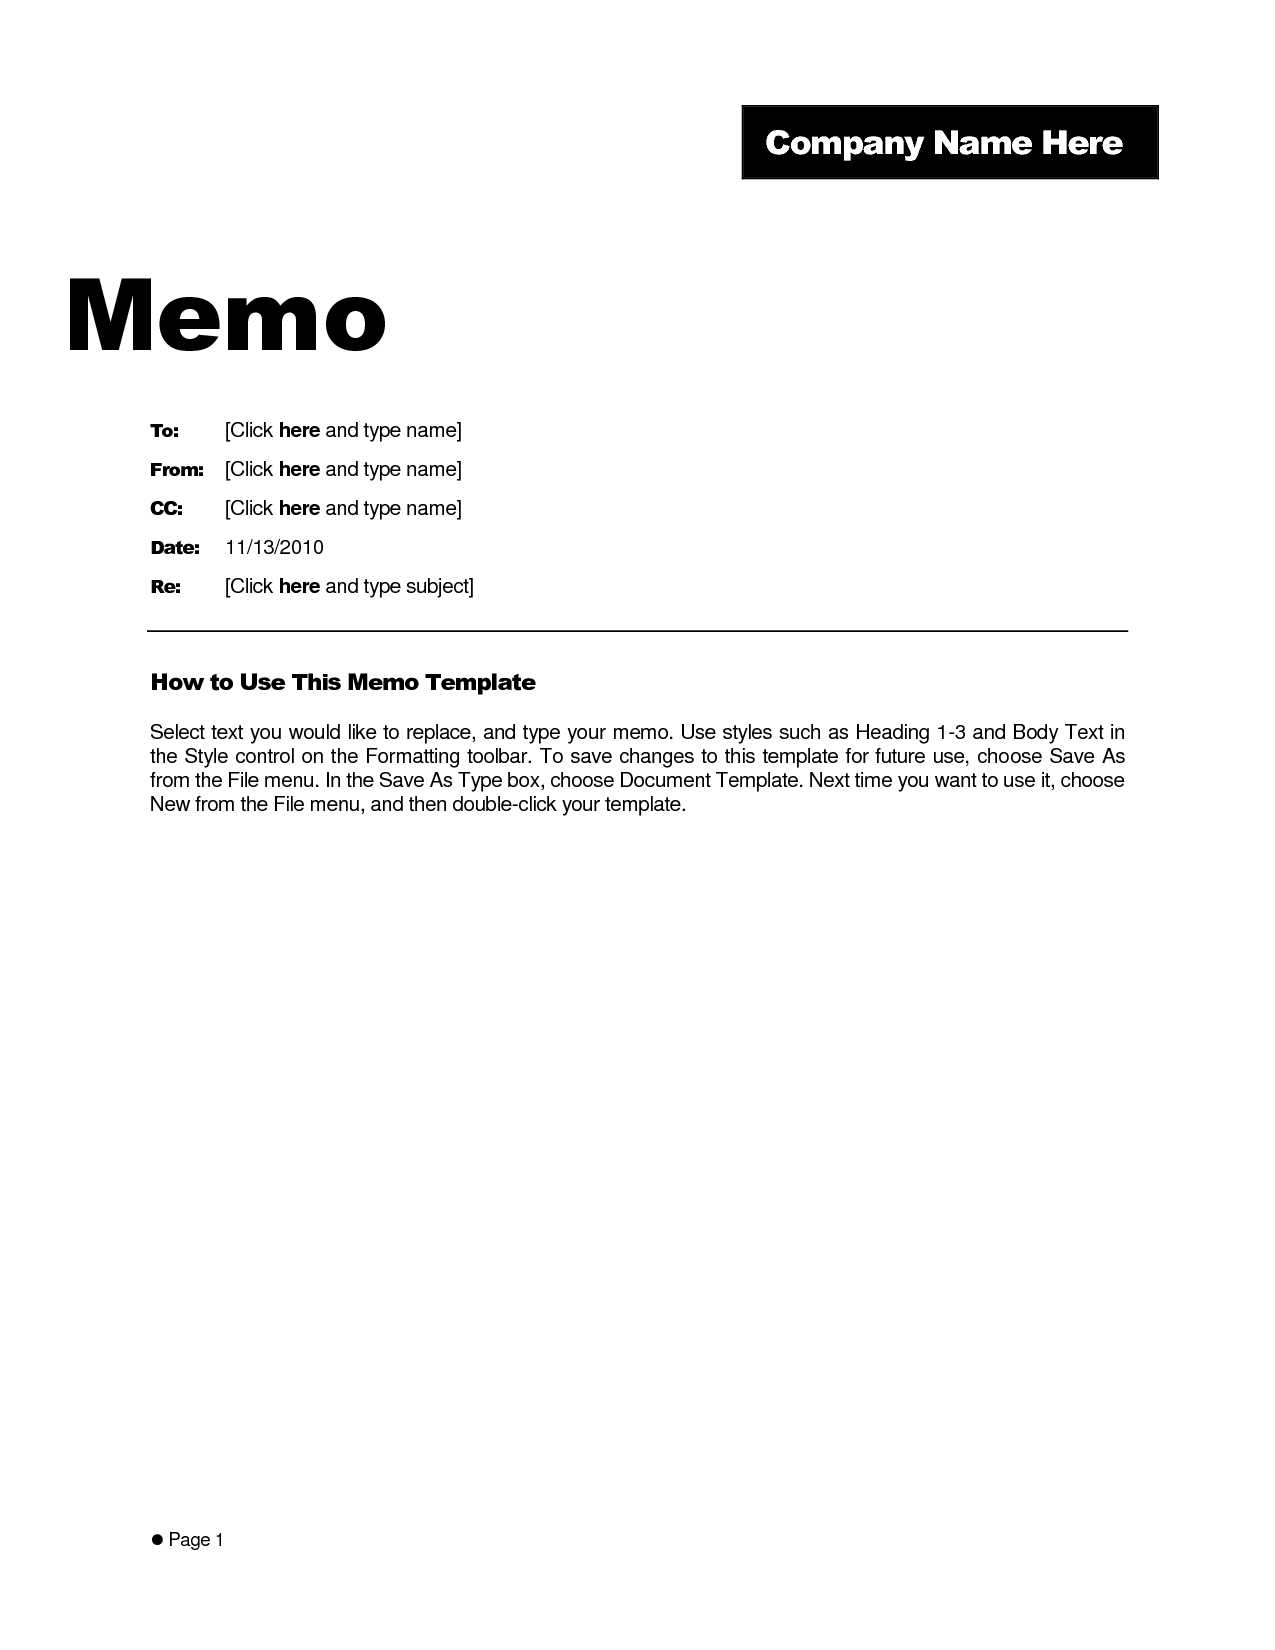 Microsoft Word Memo Template Example – Teplates For Every Day For Memo Template Word 2010